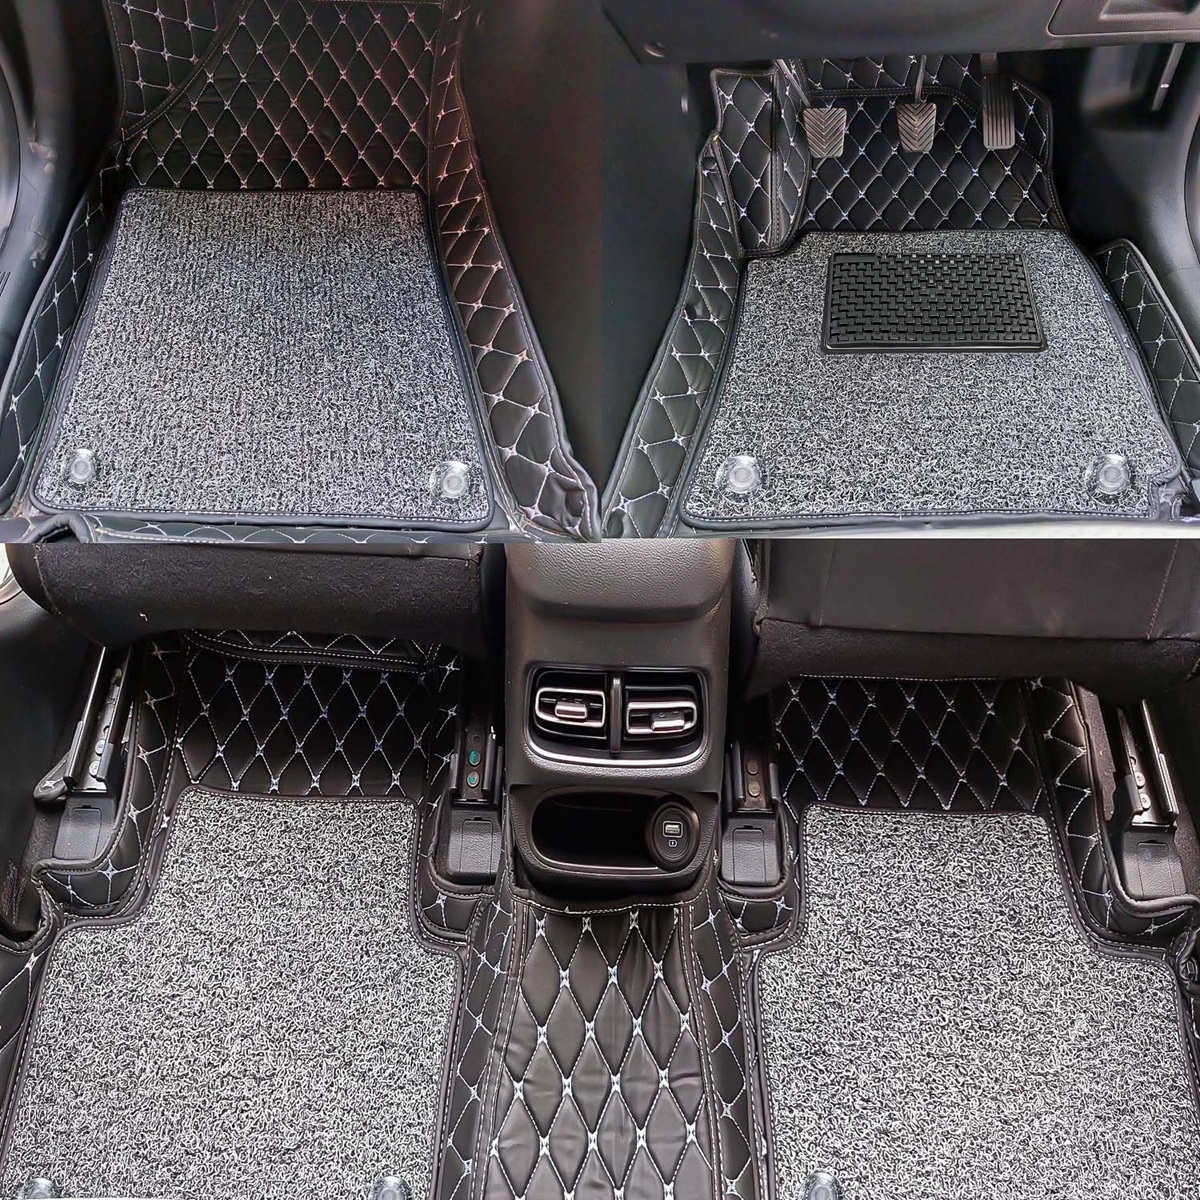 7D Floor mats for All cars on RideoFrenzy